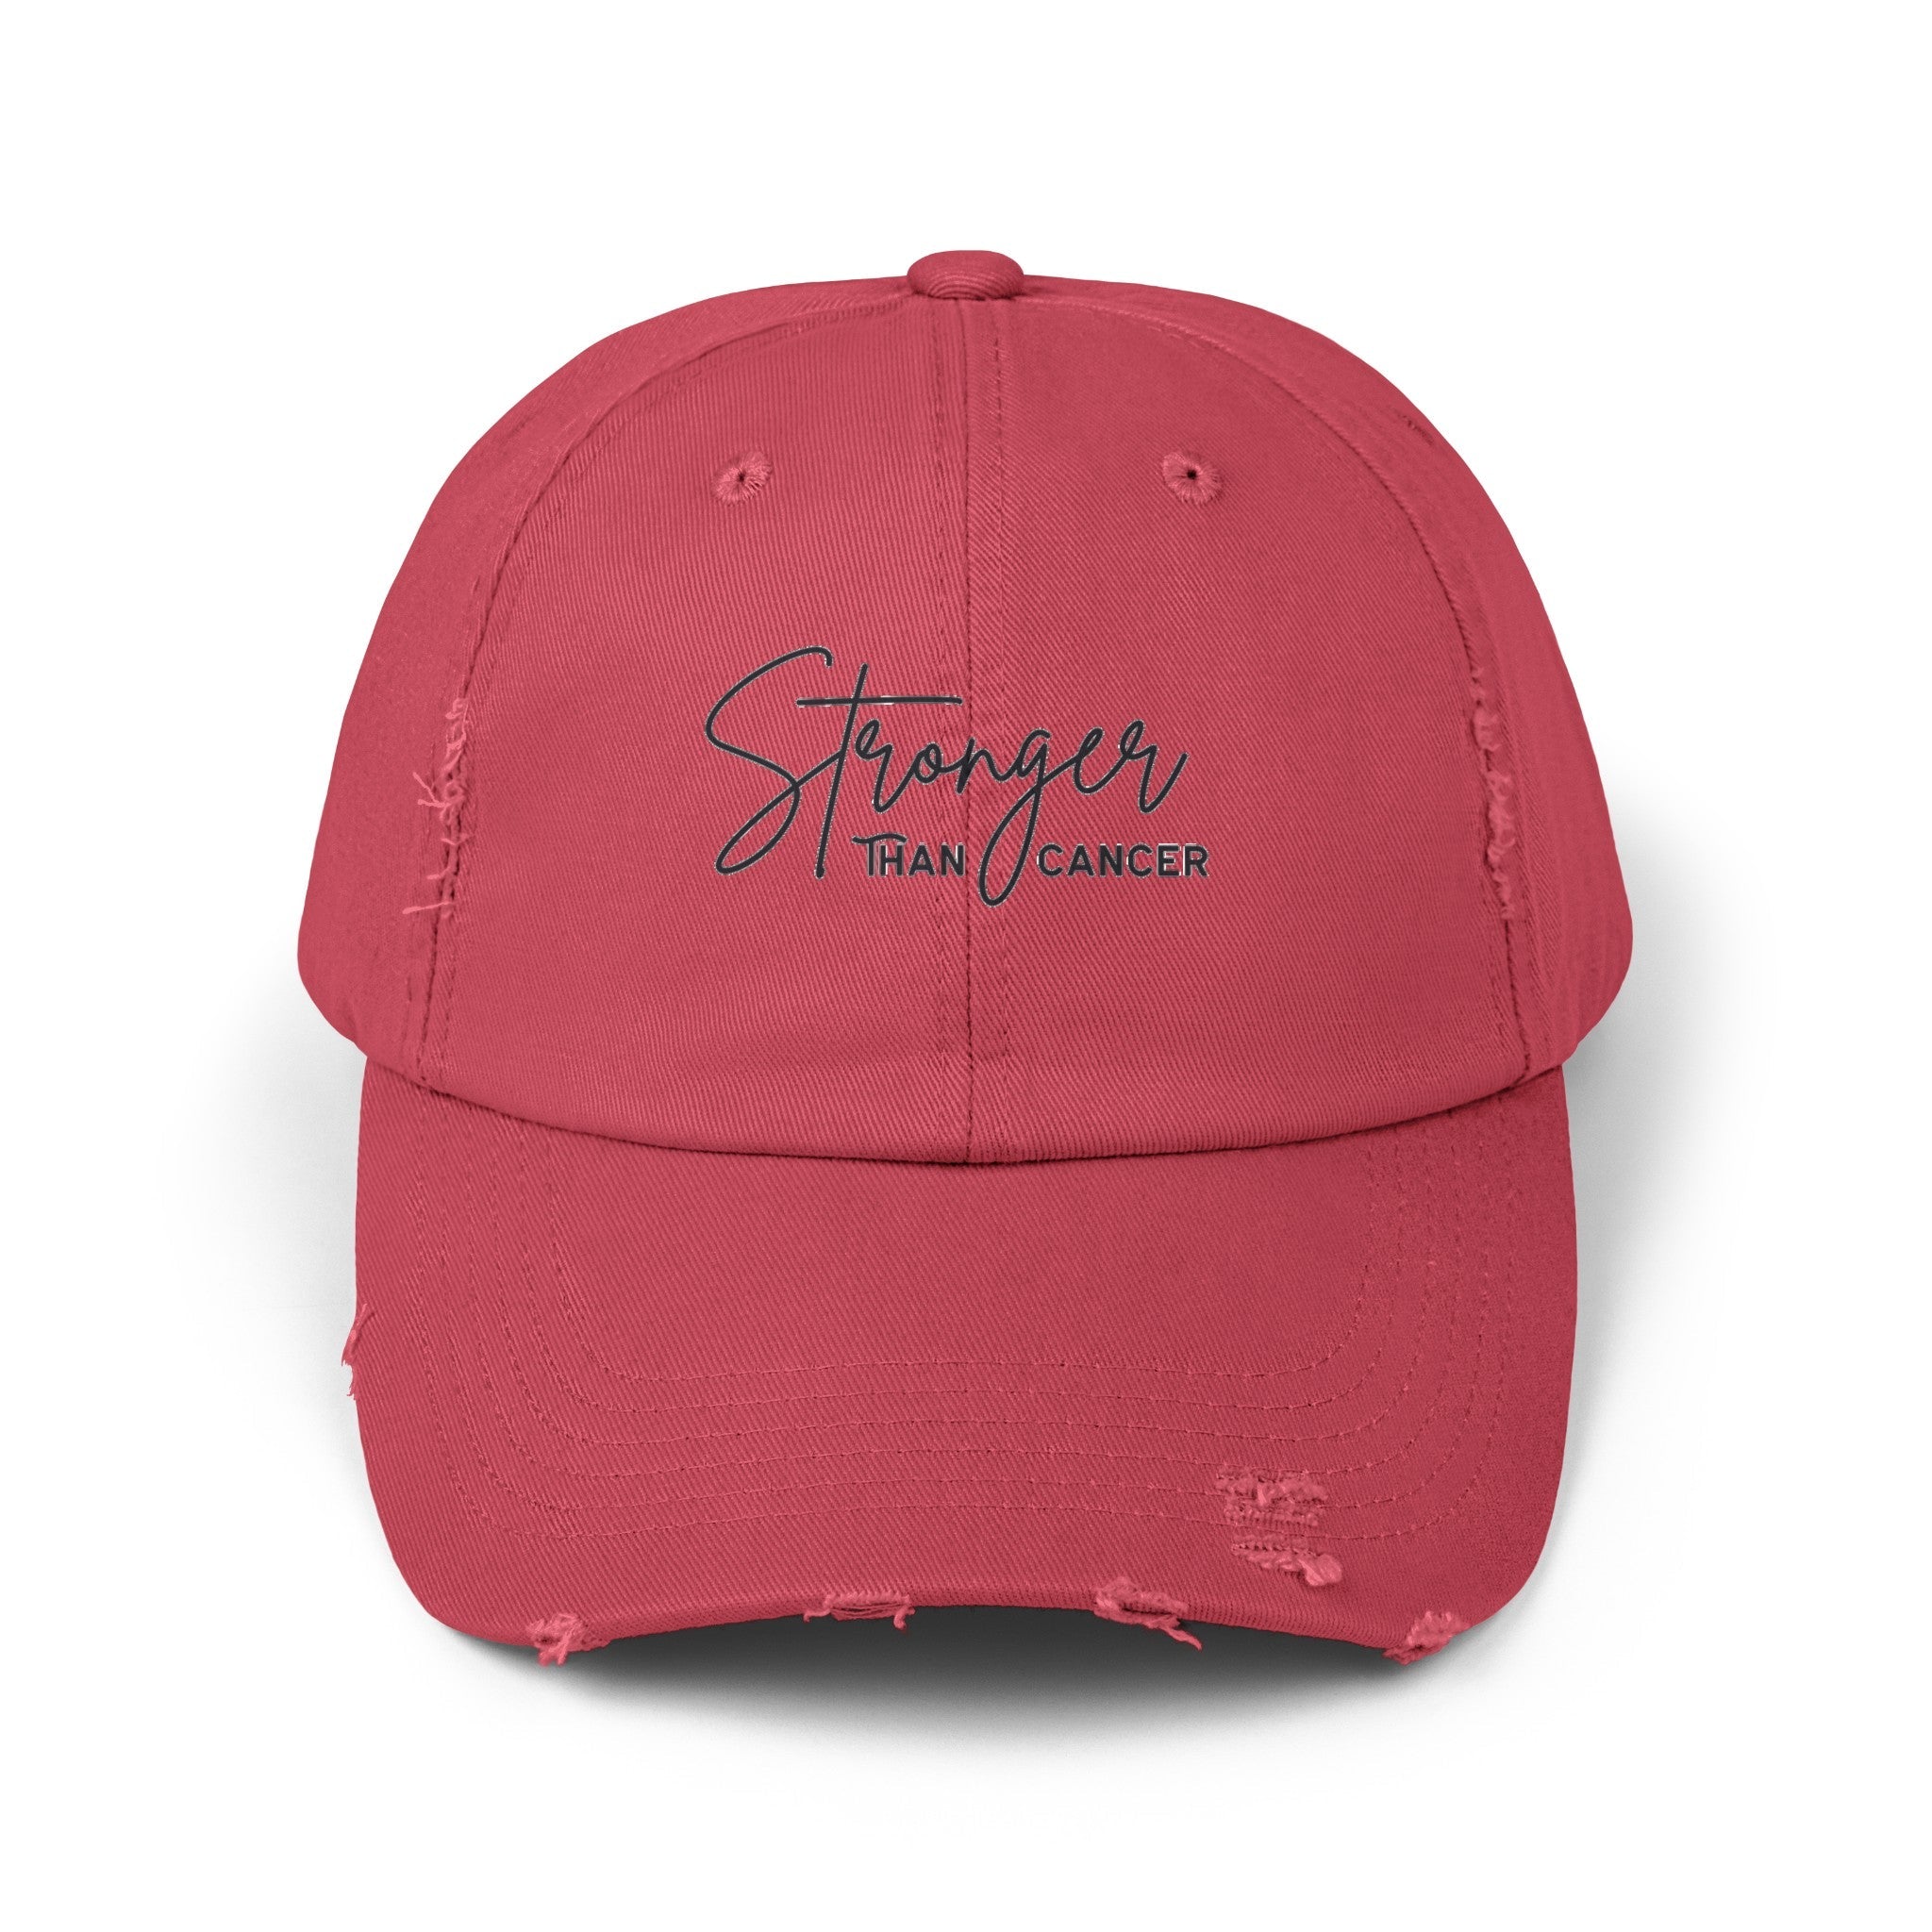 Distressed Cap Stronger Than Cancer - Dashing Red / One size - Hats